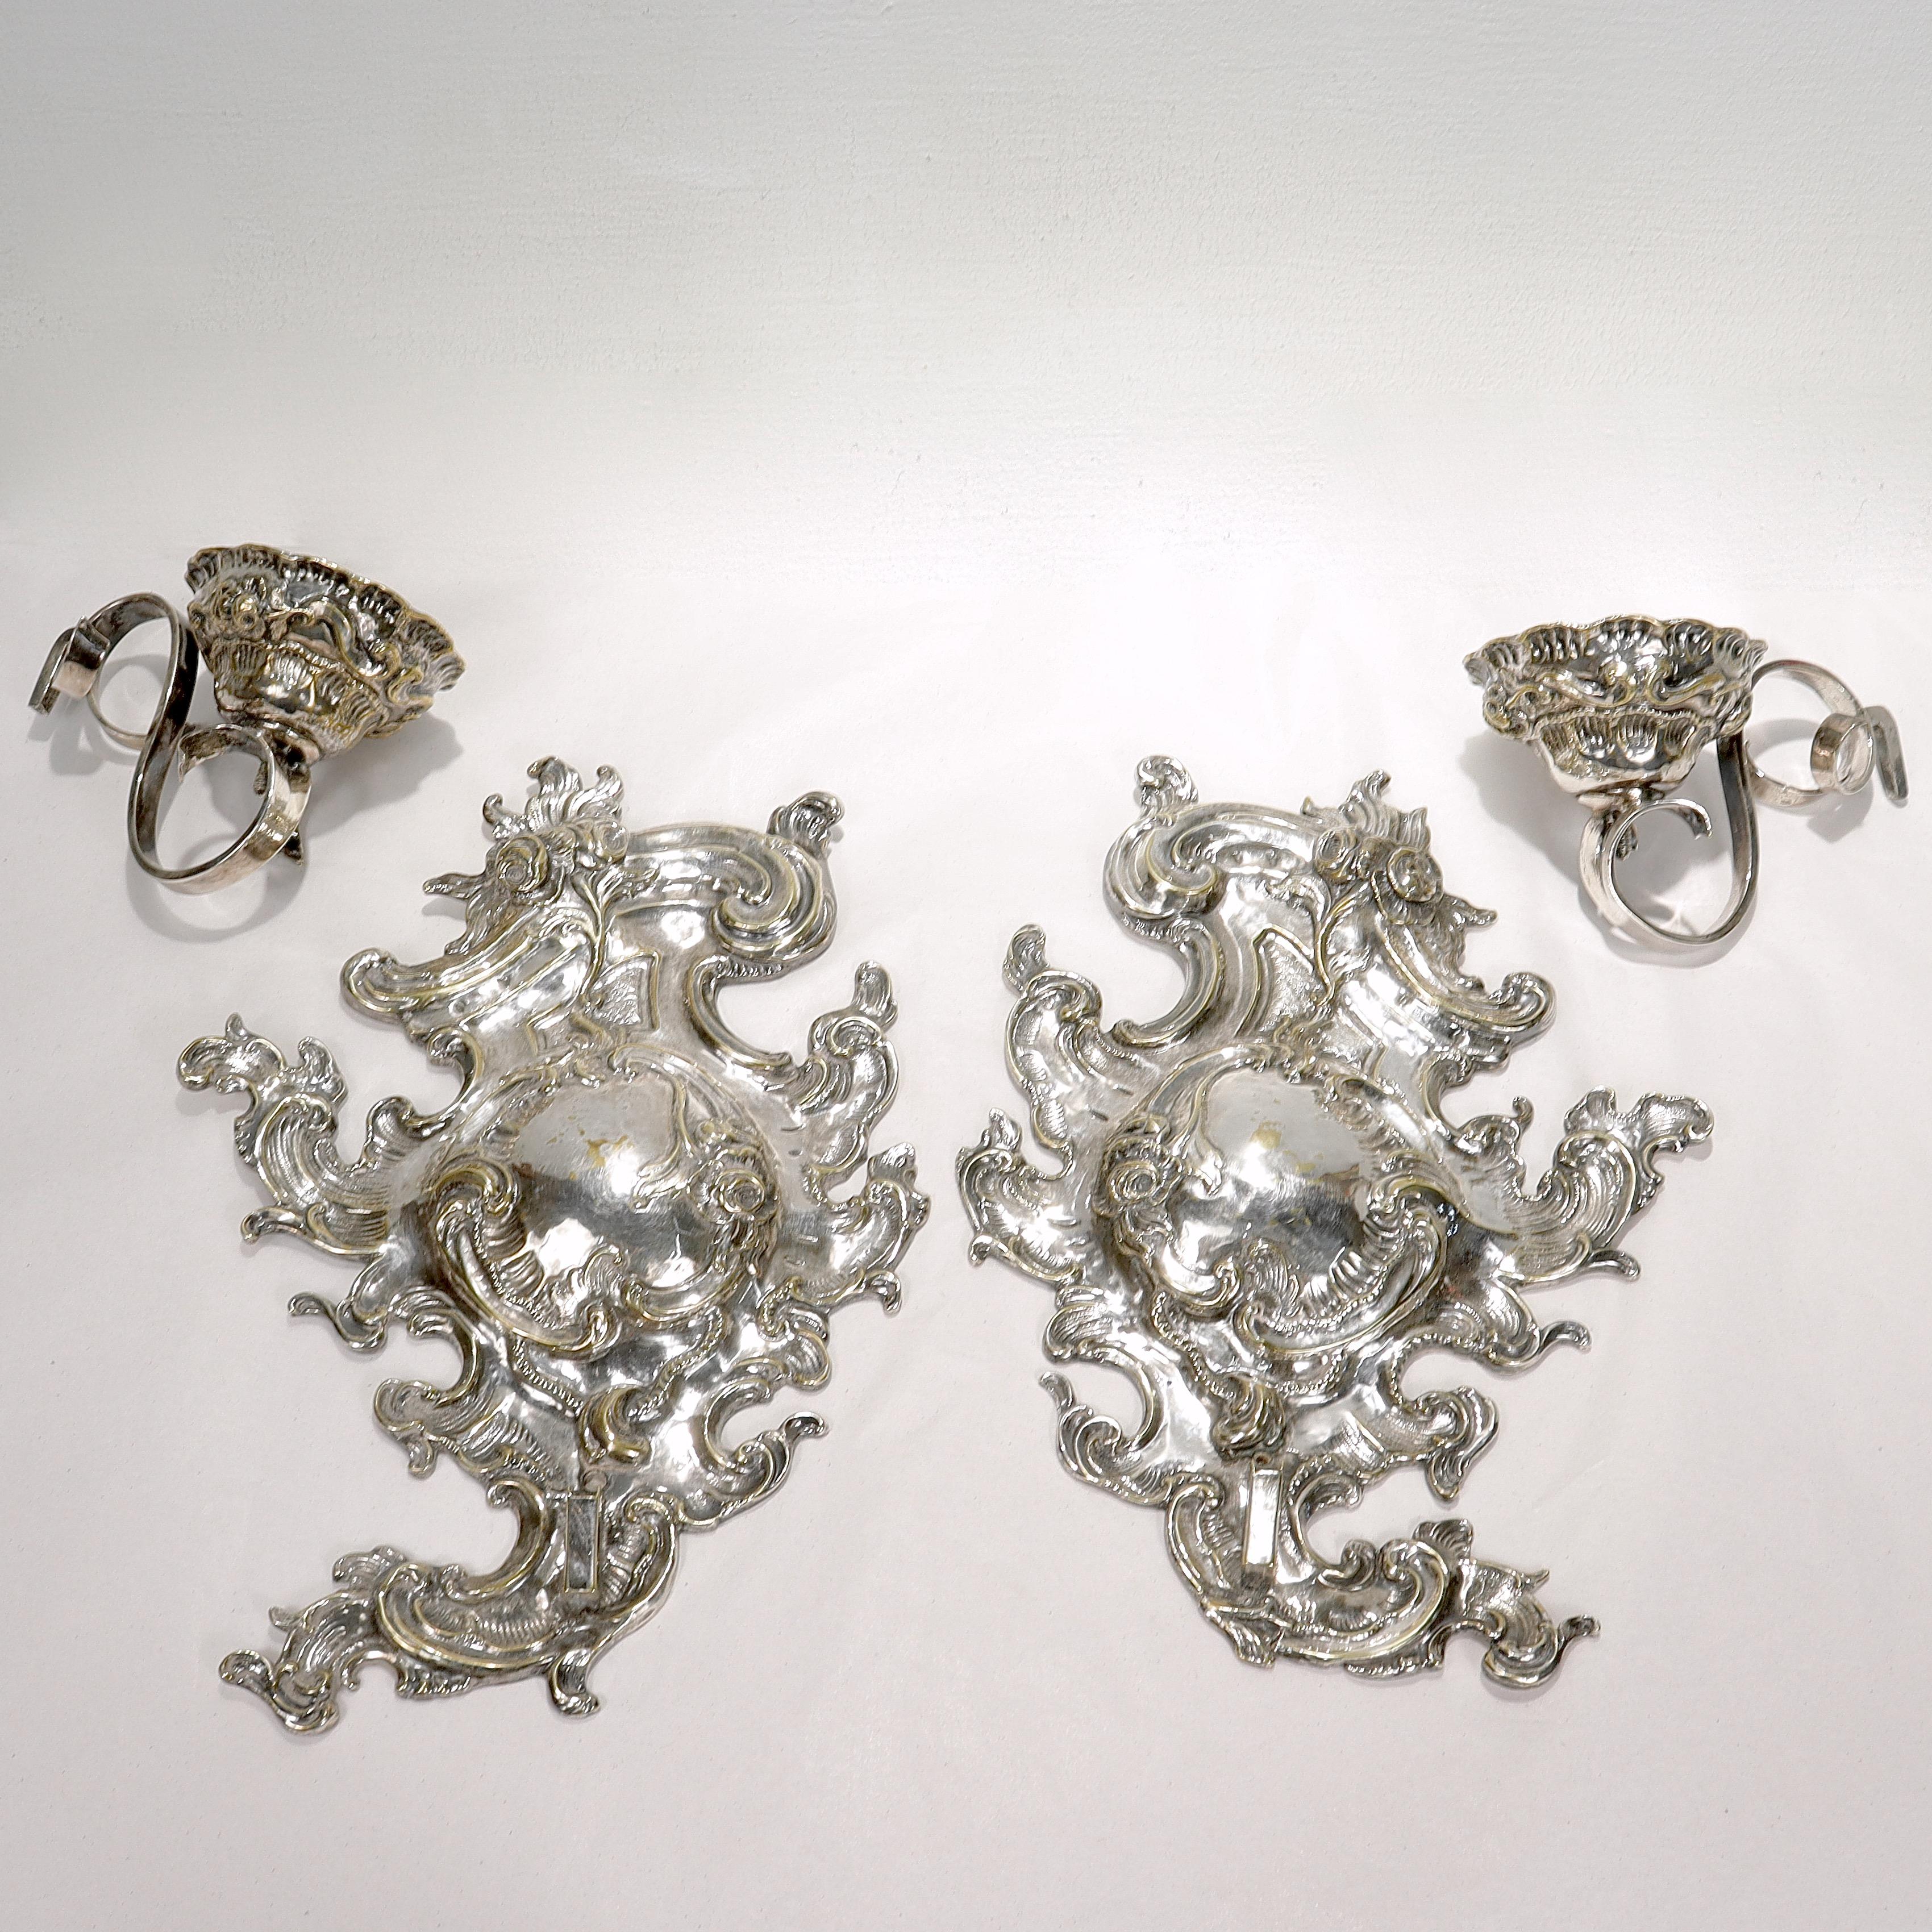 Antique Rococo or Rococo Revival Silver Plated Wall Sconces For Sale 13